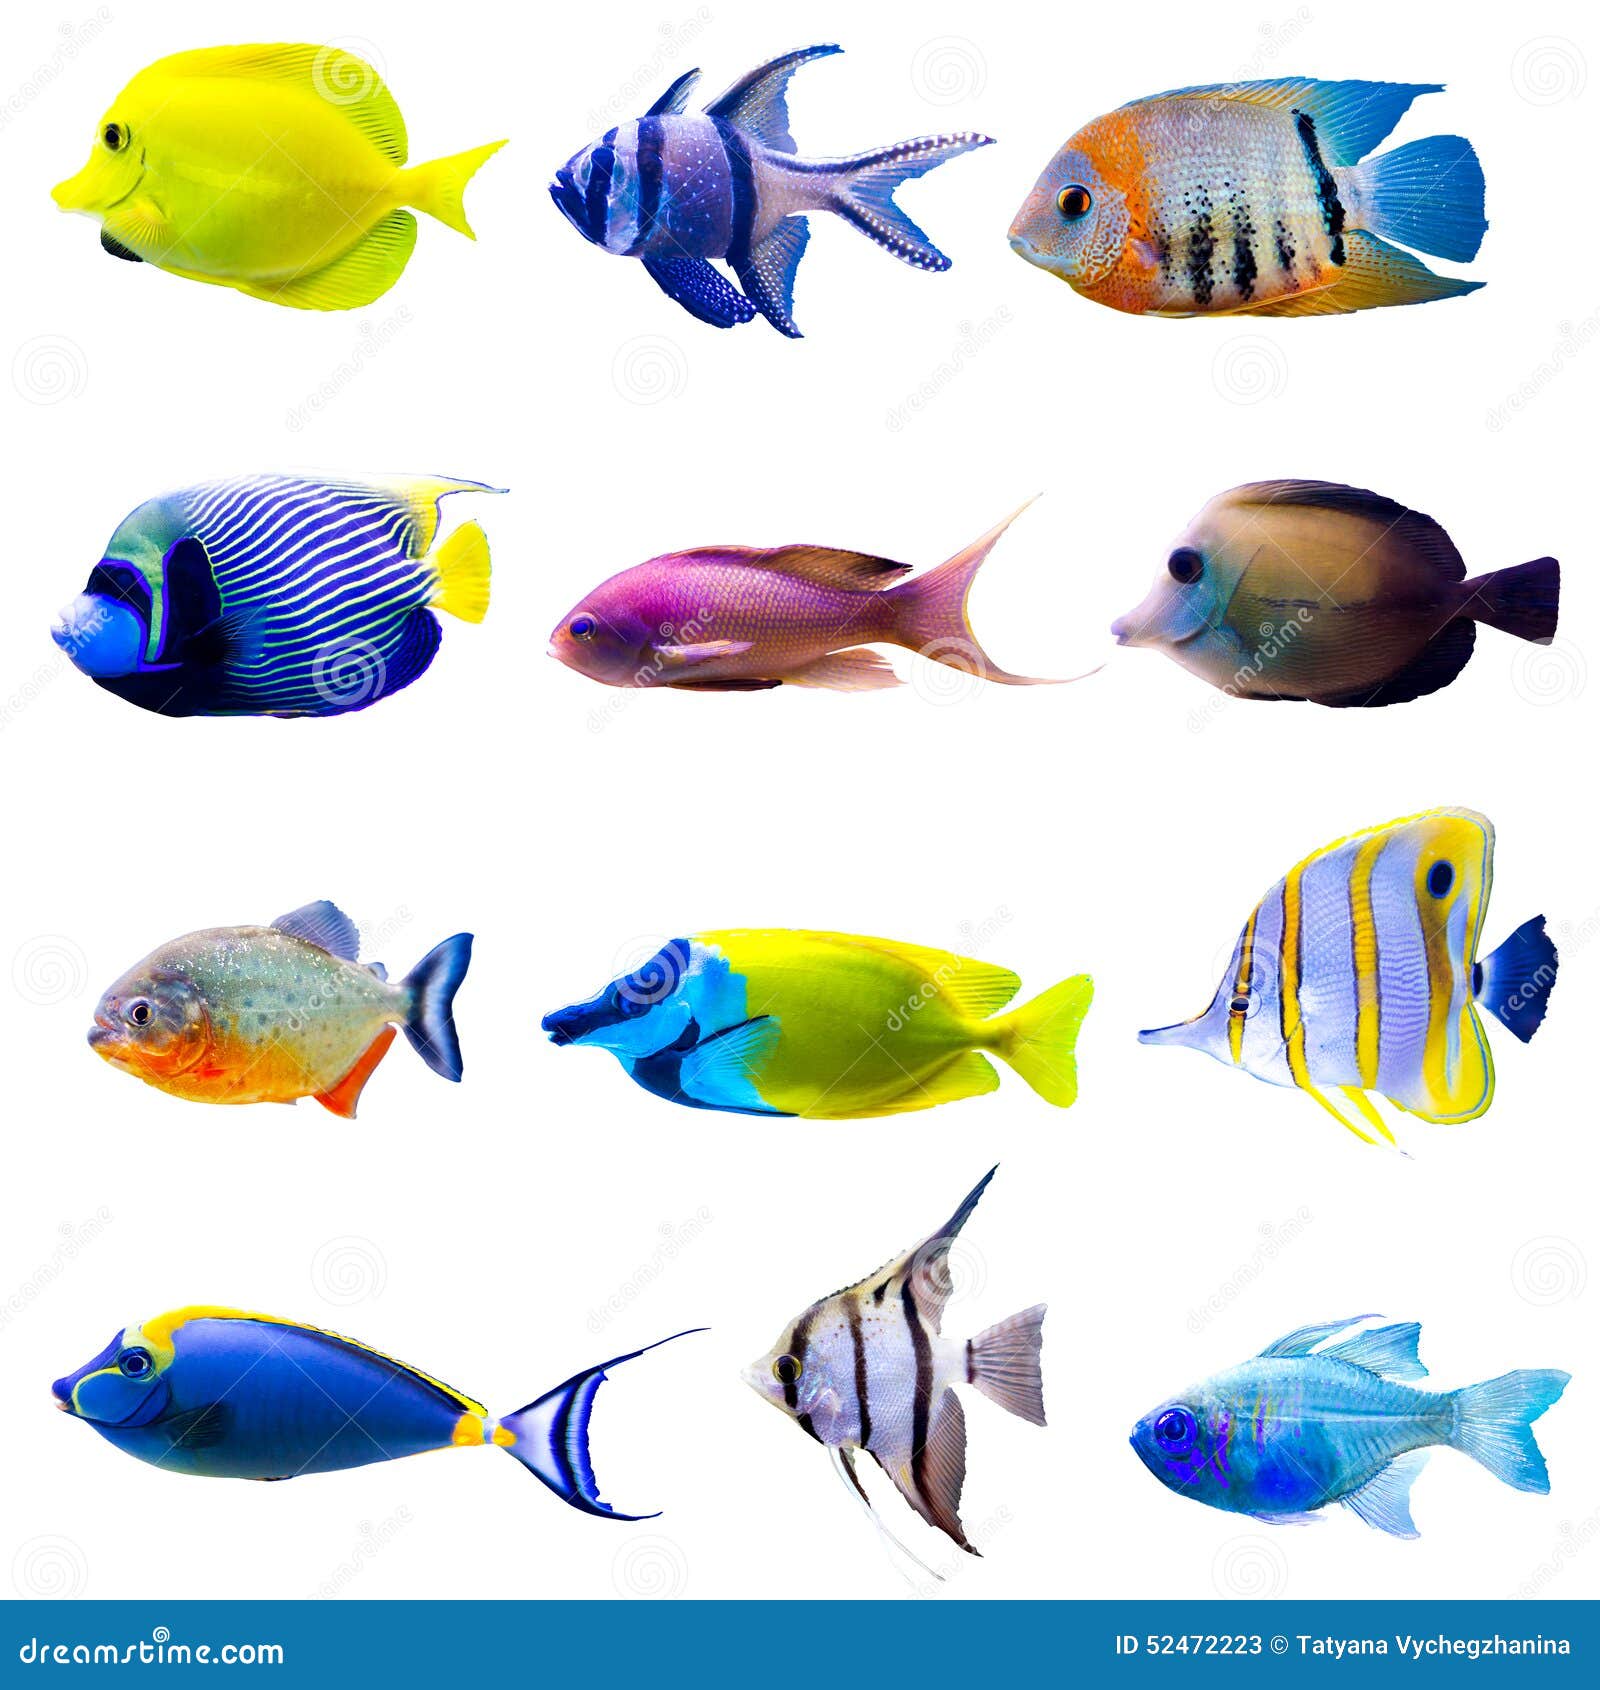 tropical fish collection